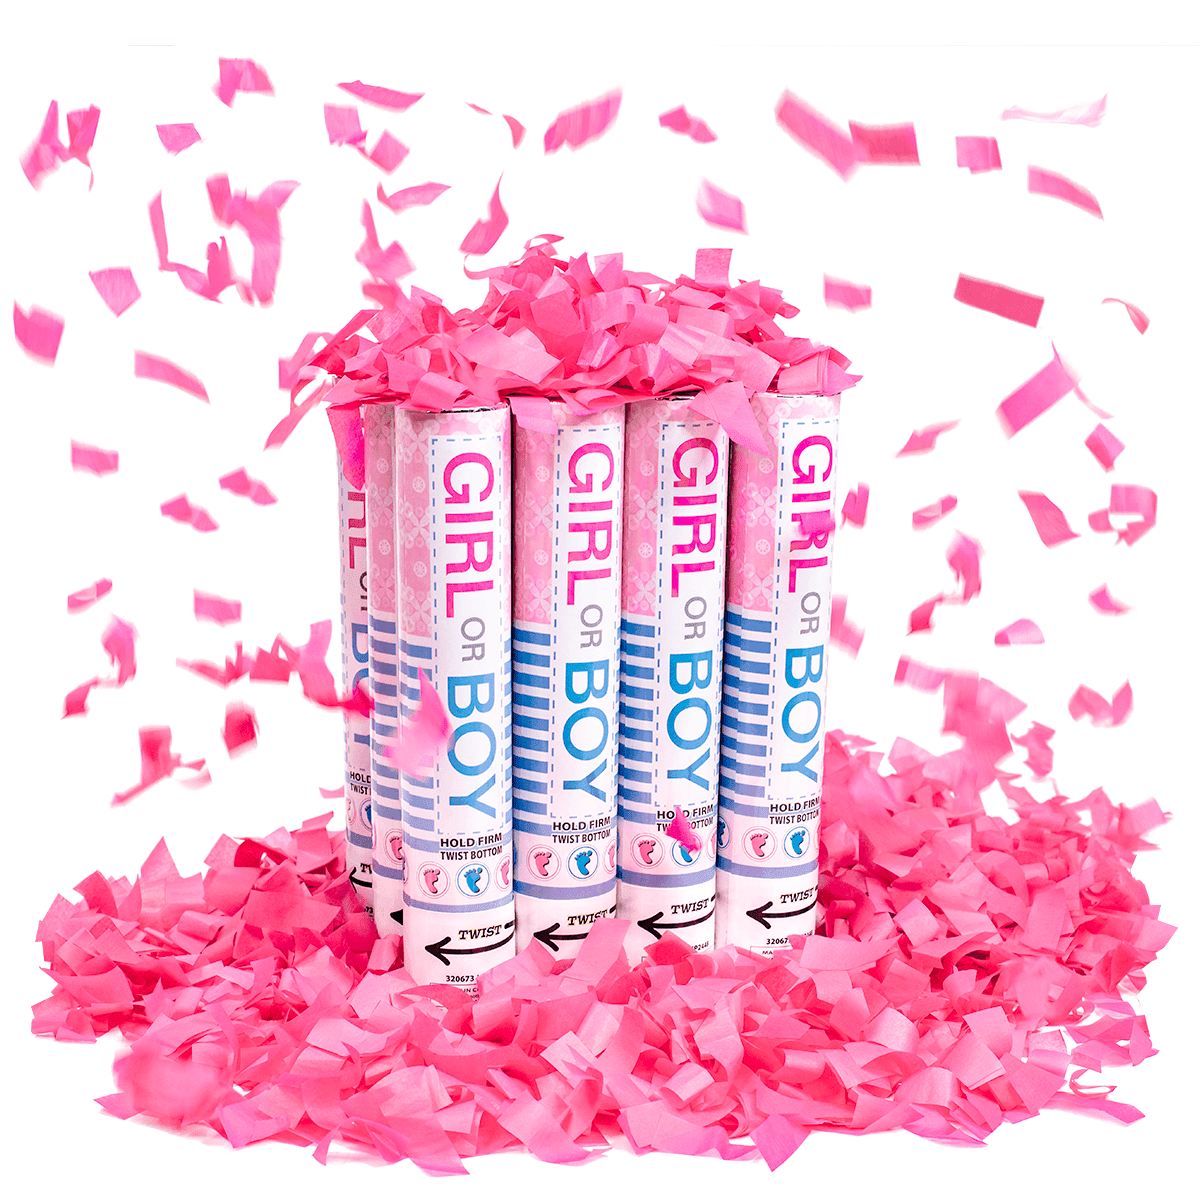 Pink Gender Reveal Confetti Cannon 12 Pack 